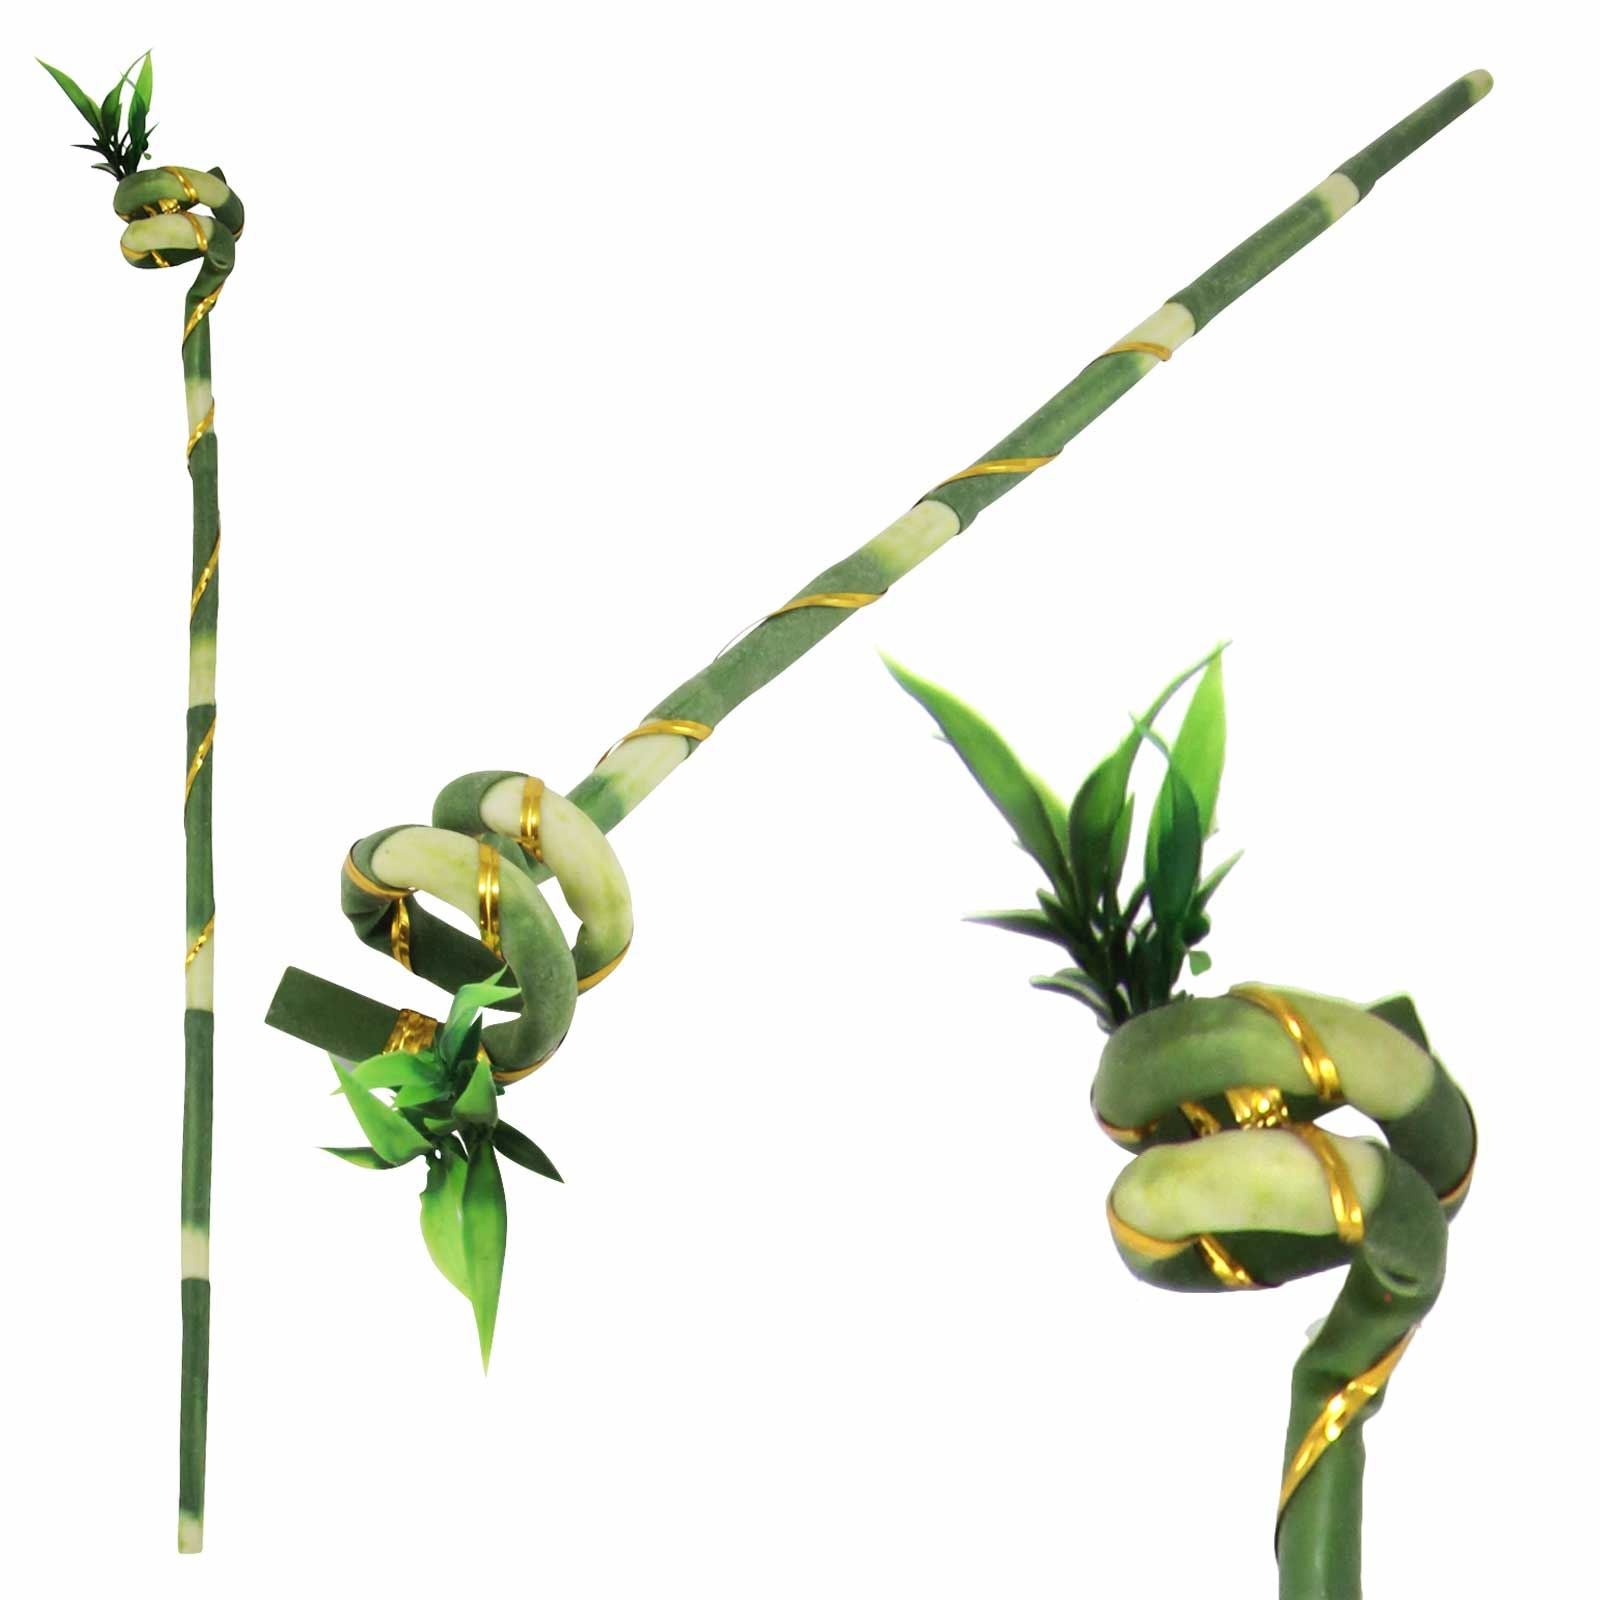 Long Spiral Twist Lucky Bamboo Stem with Sprout - Artificial Fake Foliage Leaf